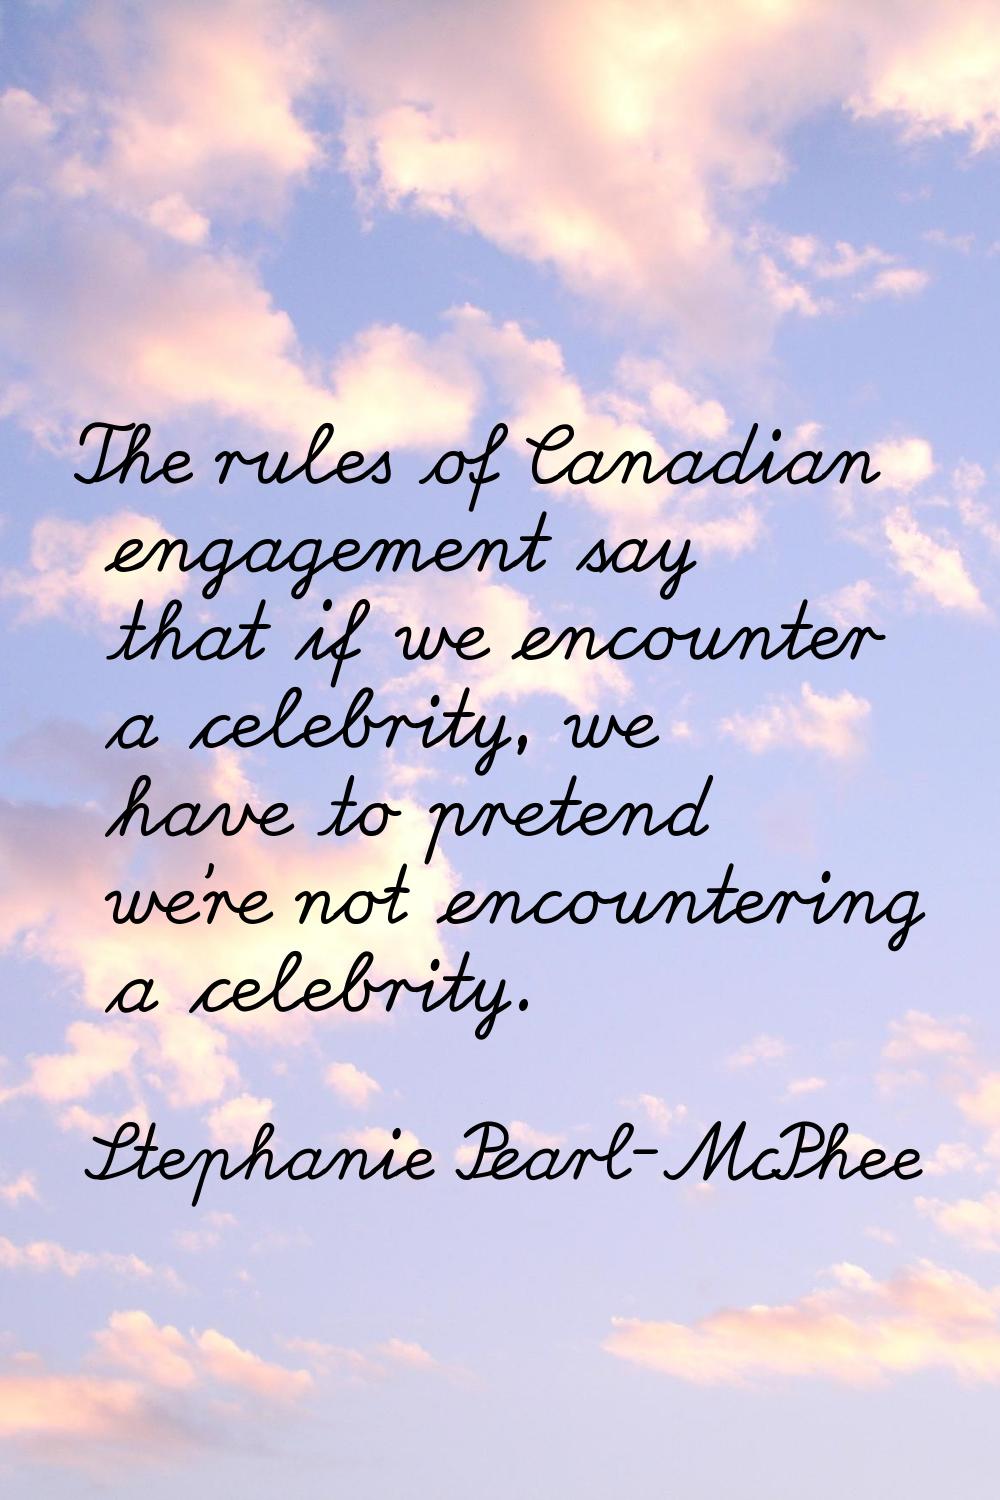 The rules of Canadian engagement say that if we encounter a celebrity, we have to pretend we're not